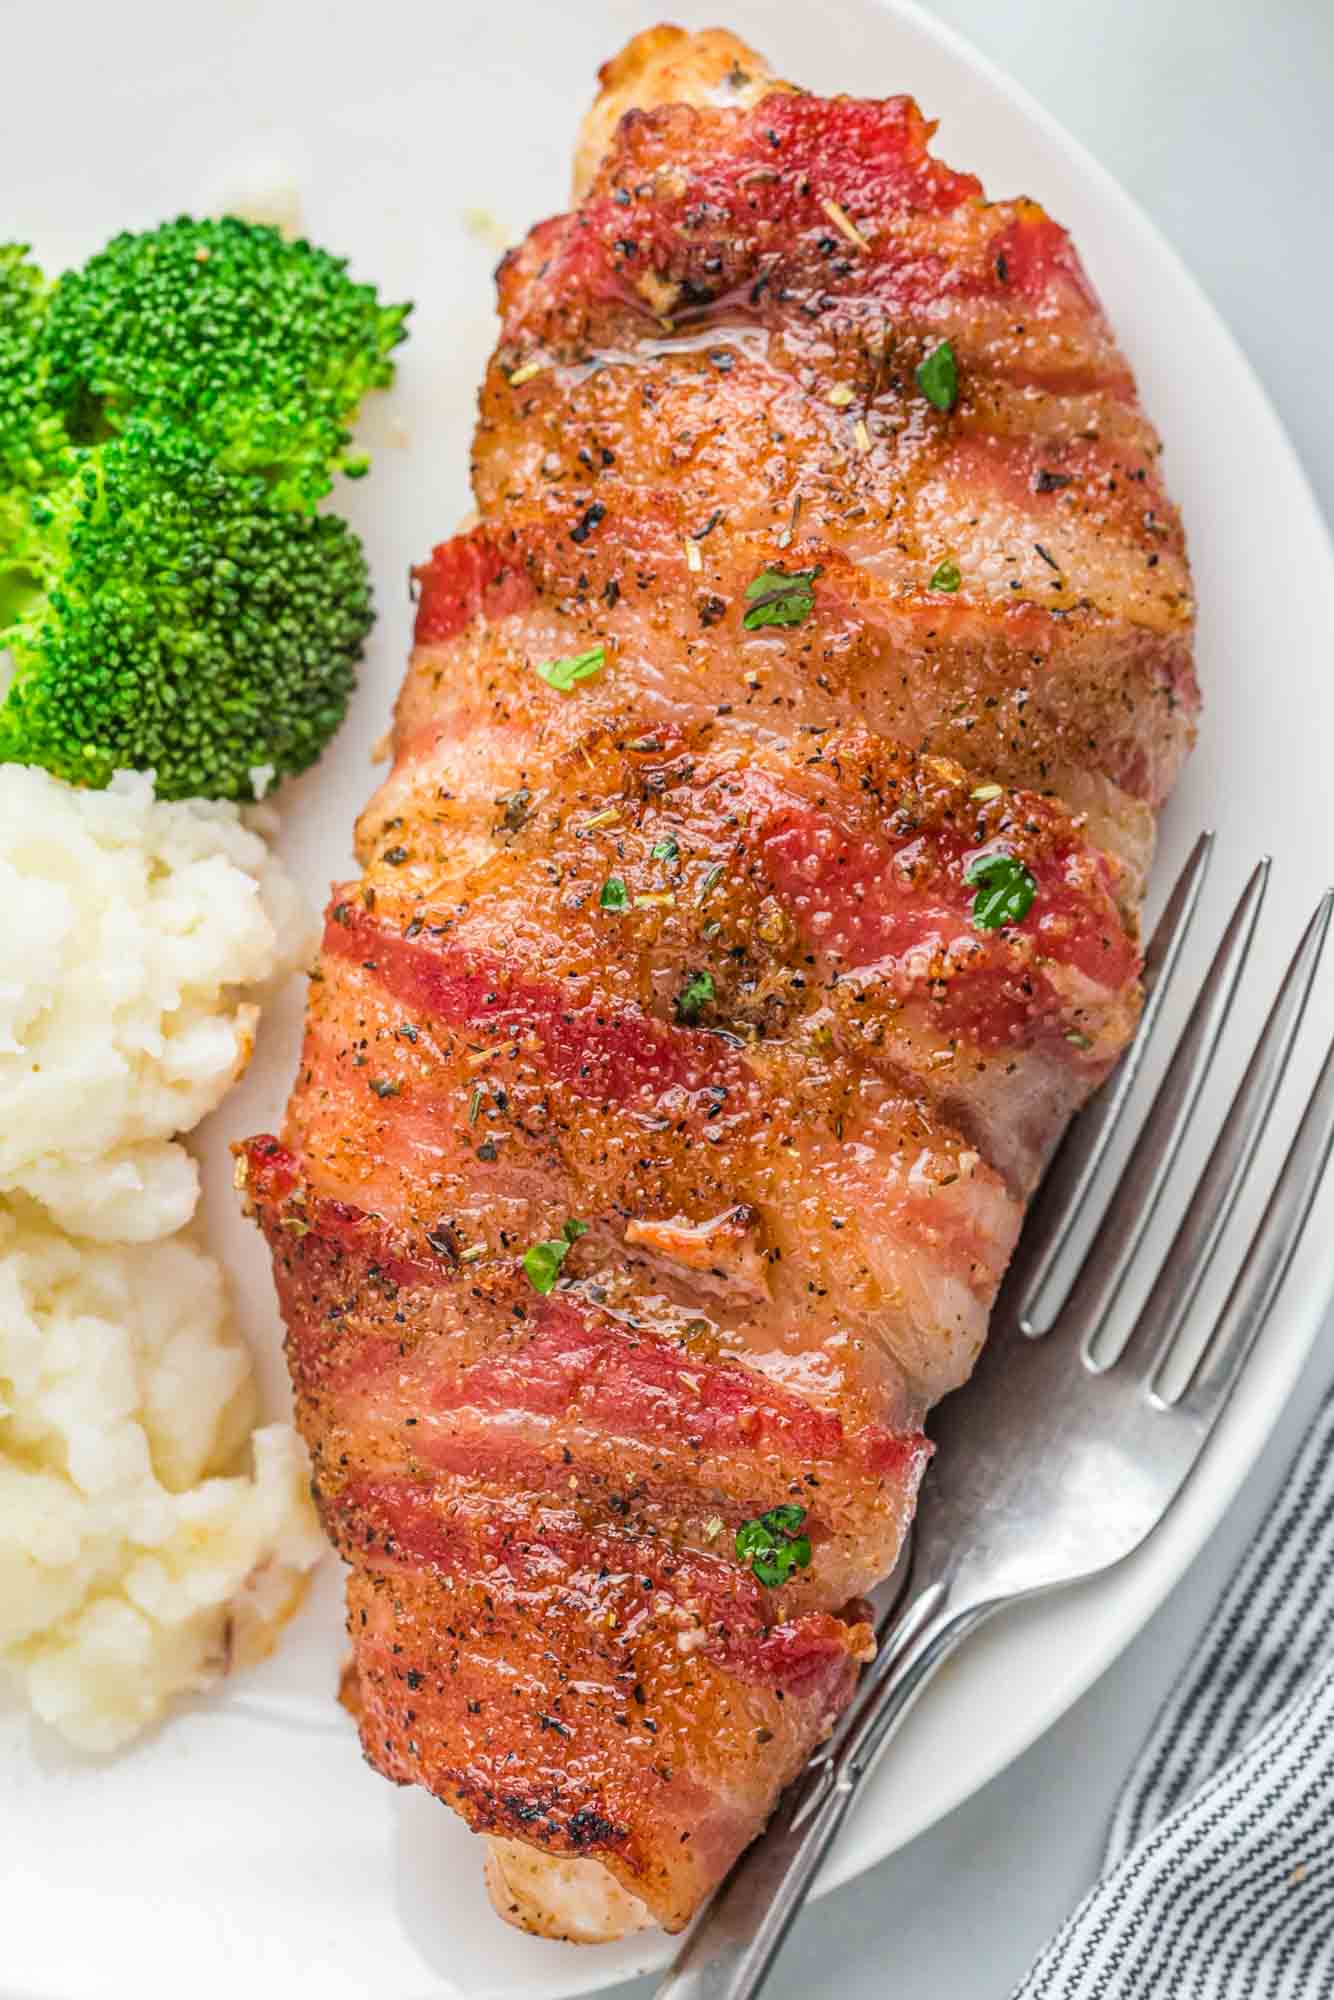 Bacon wrapped chicken breast served with mashed potatoes and steamed broccoli